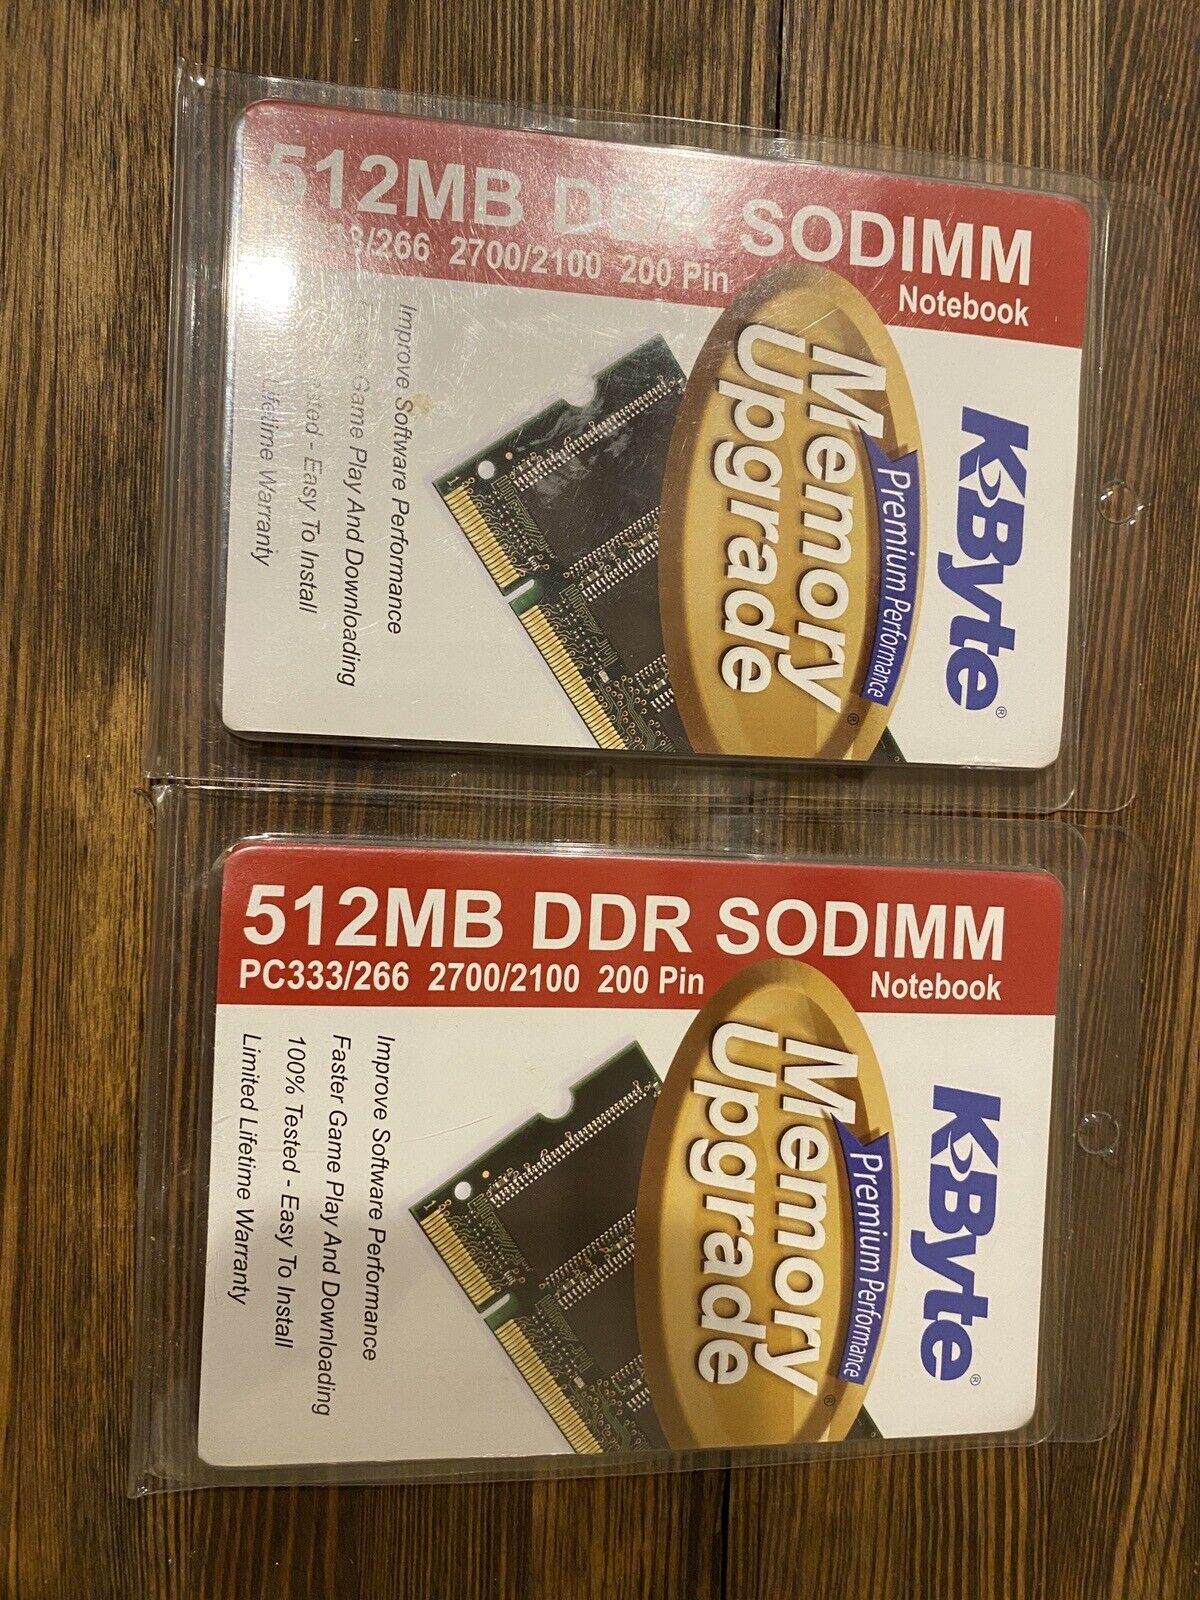 2 Packs Of KByte Memory Upgrade 512MB PC 333/266 DDR NB Notebook 200 Pin